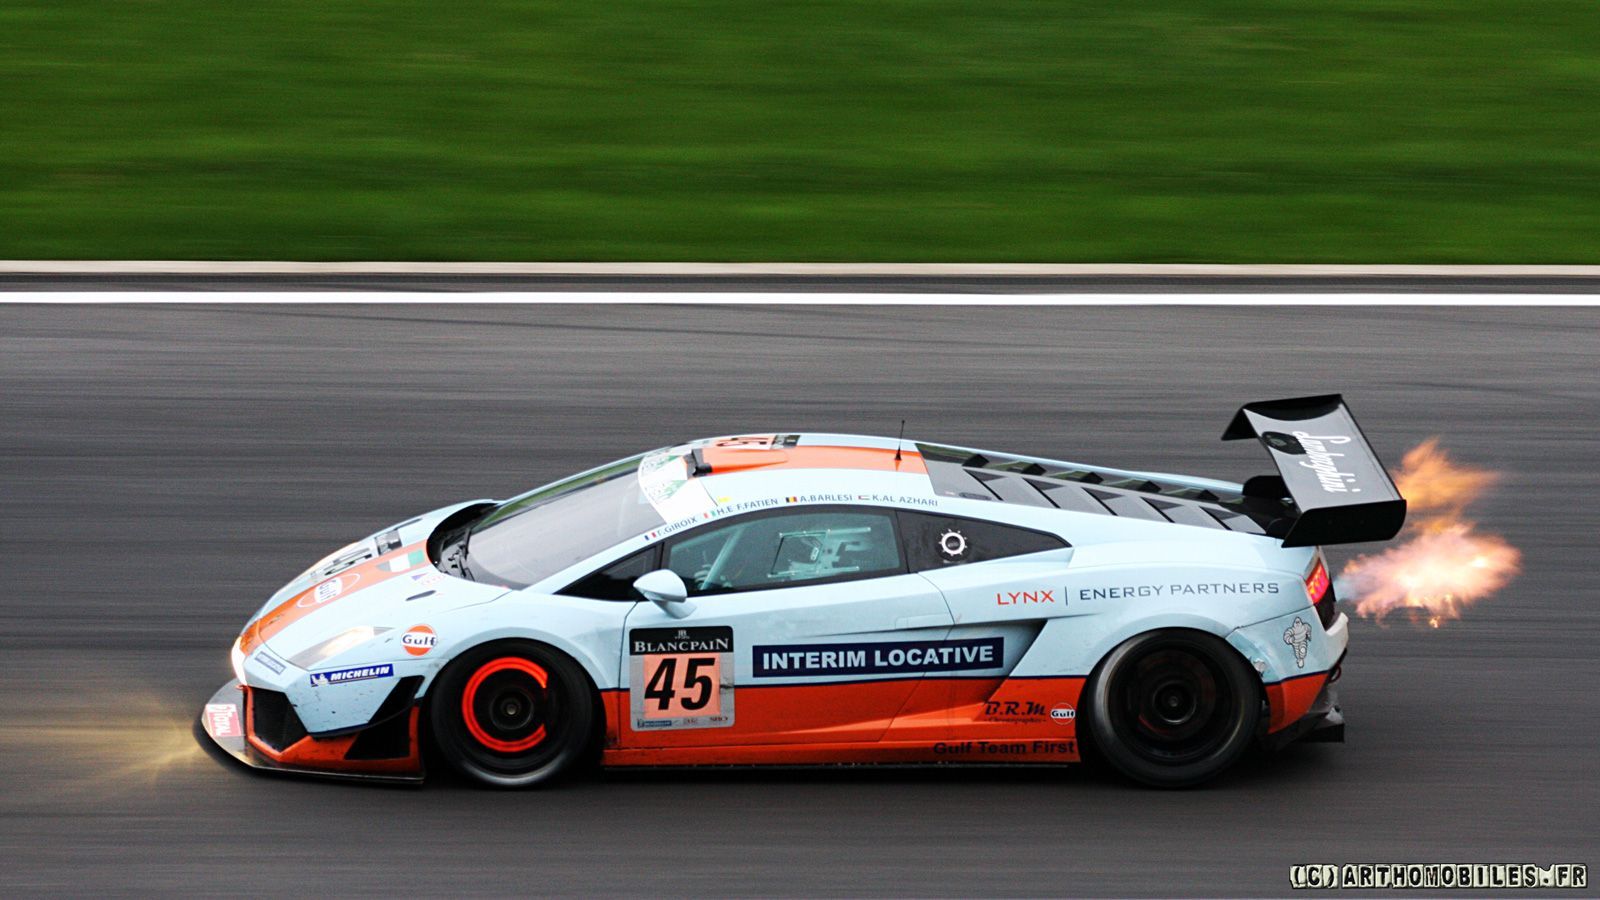 Your ridiculously cool Gulf Oil Lamborghini wallpaper is here